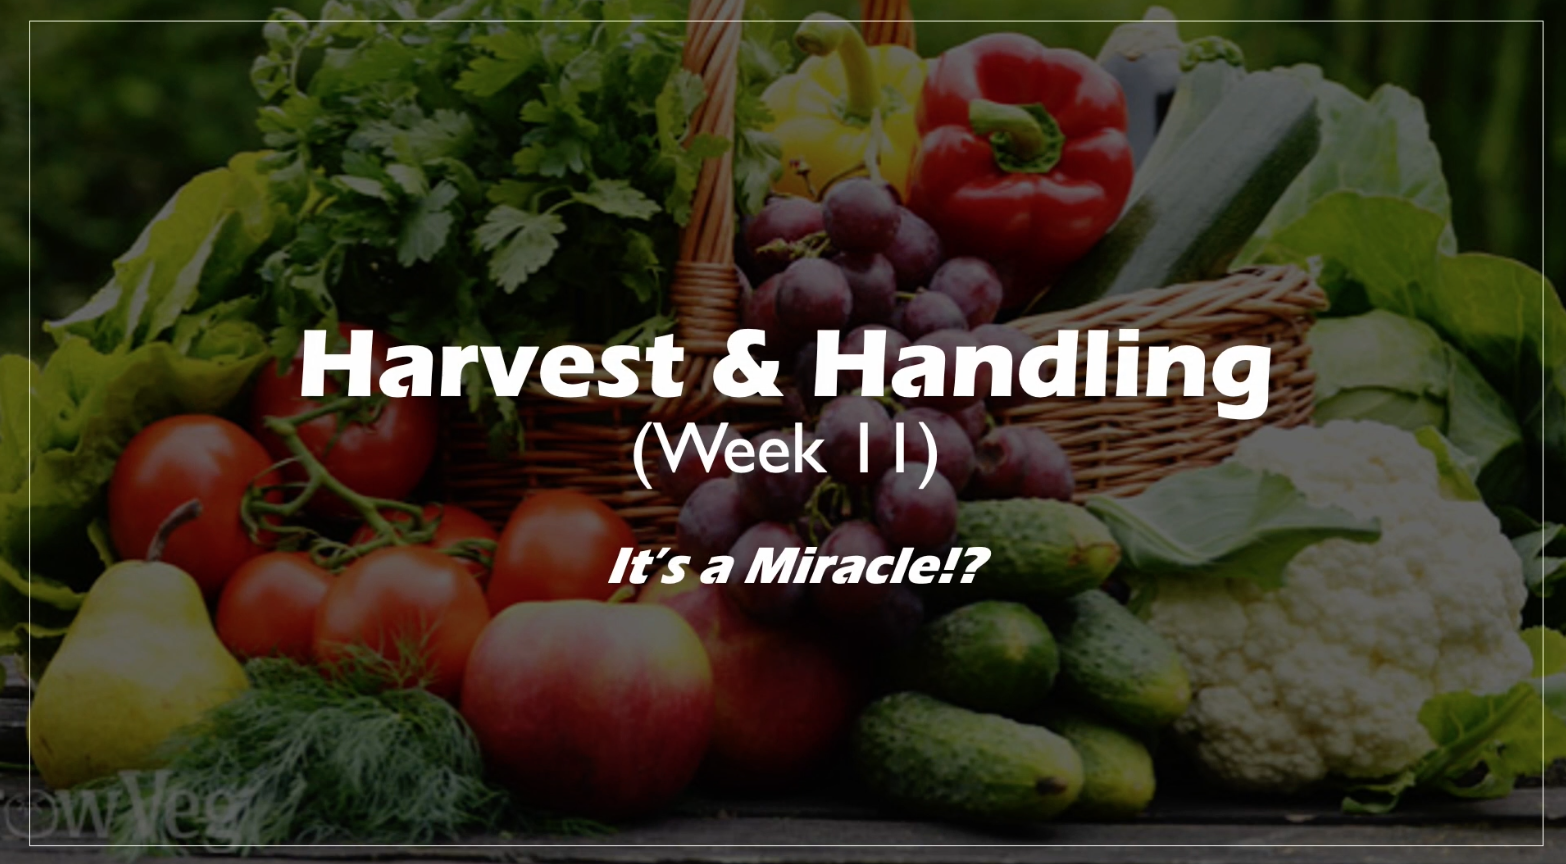 Class Instruction 11 - Harvest and Handling